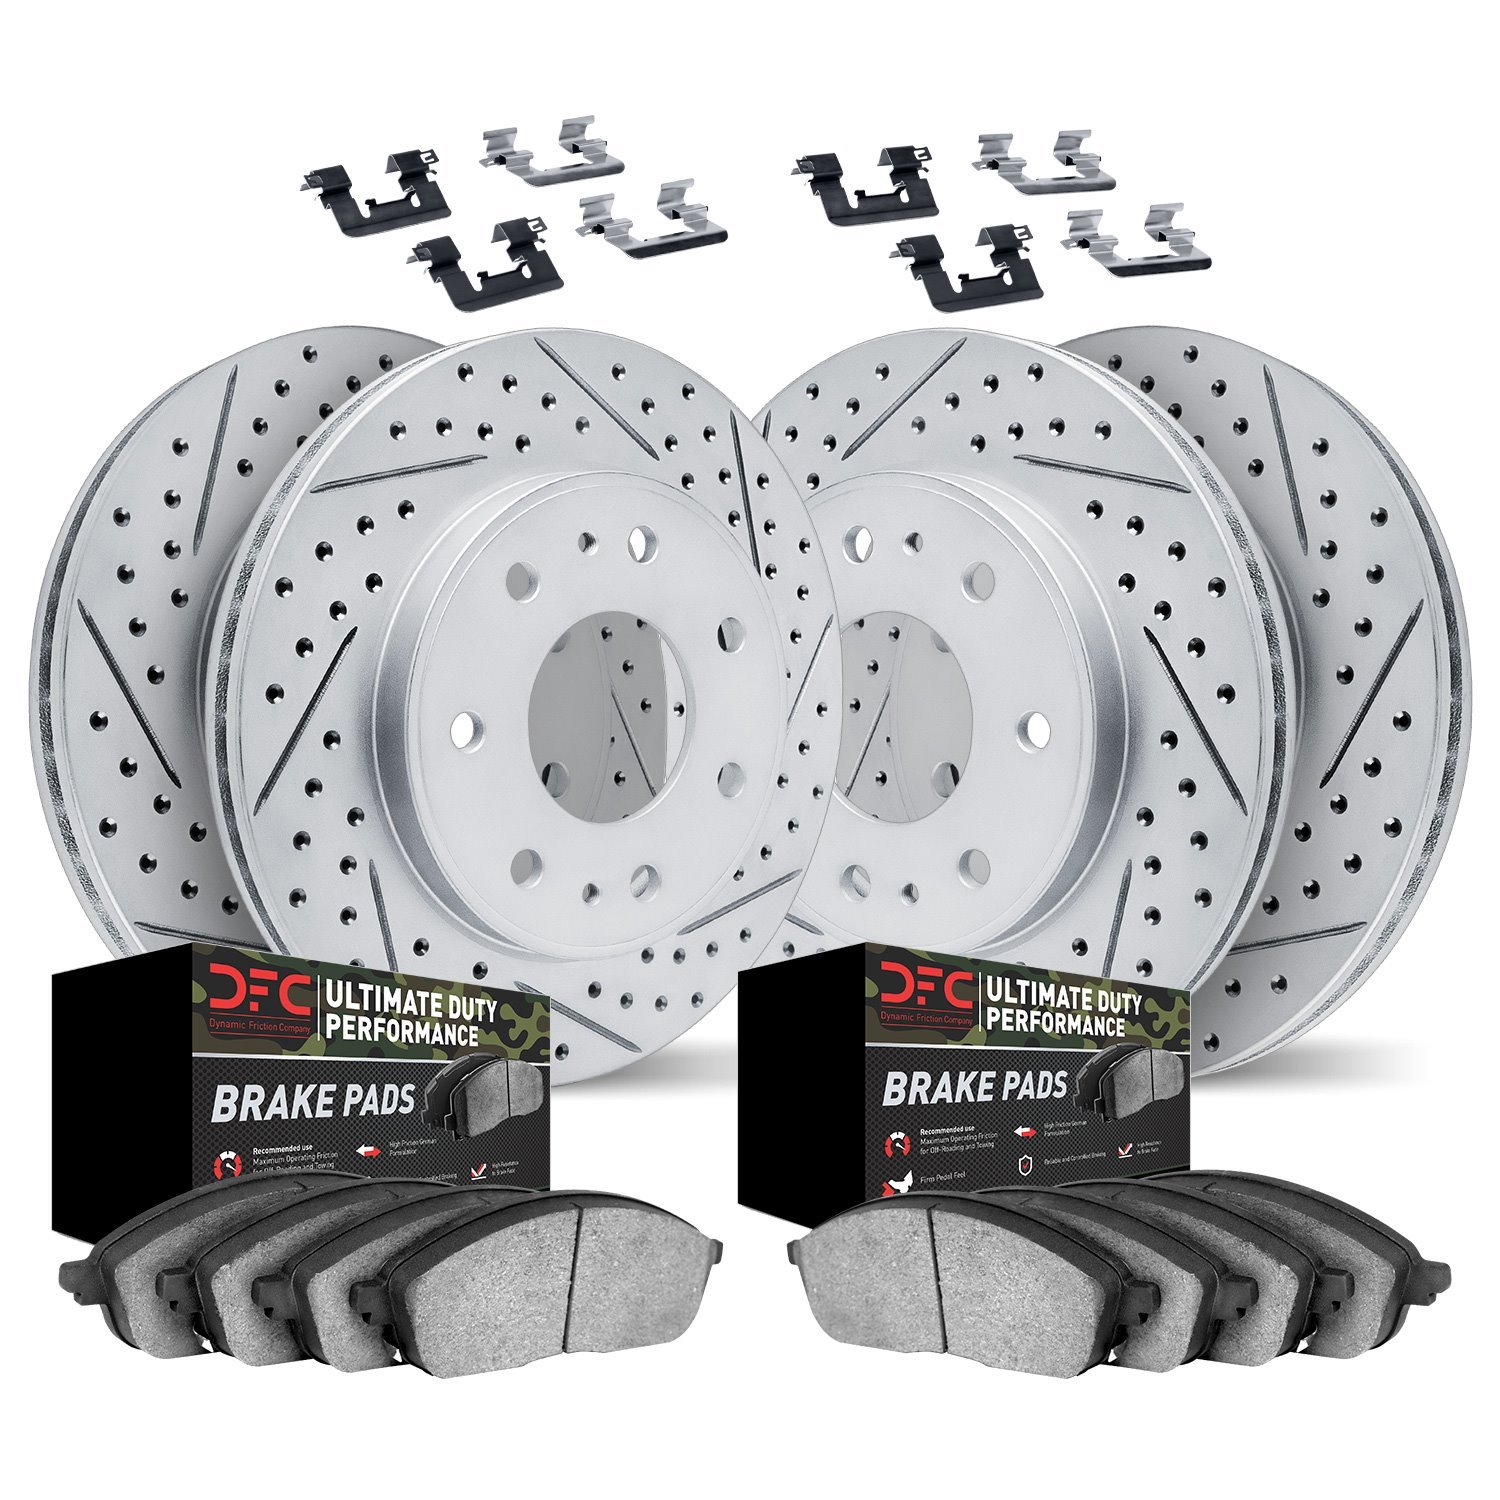 2414-54028 Geoperformance Drilled/Slotted Brake Rotors with Ultimate-Duty Brake Pads Kit & Hardware, 2009-2009 Ford/Lincoln/Merc